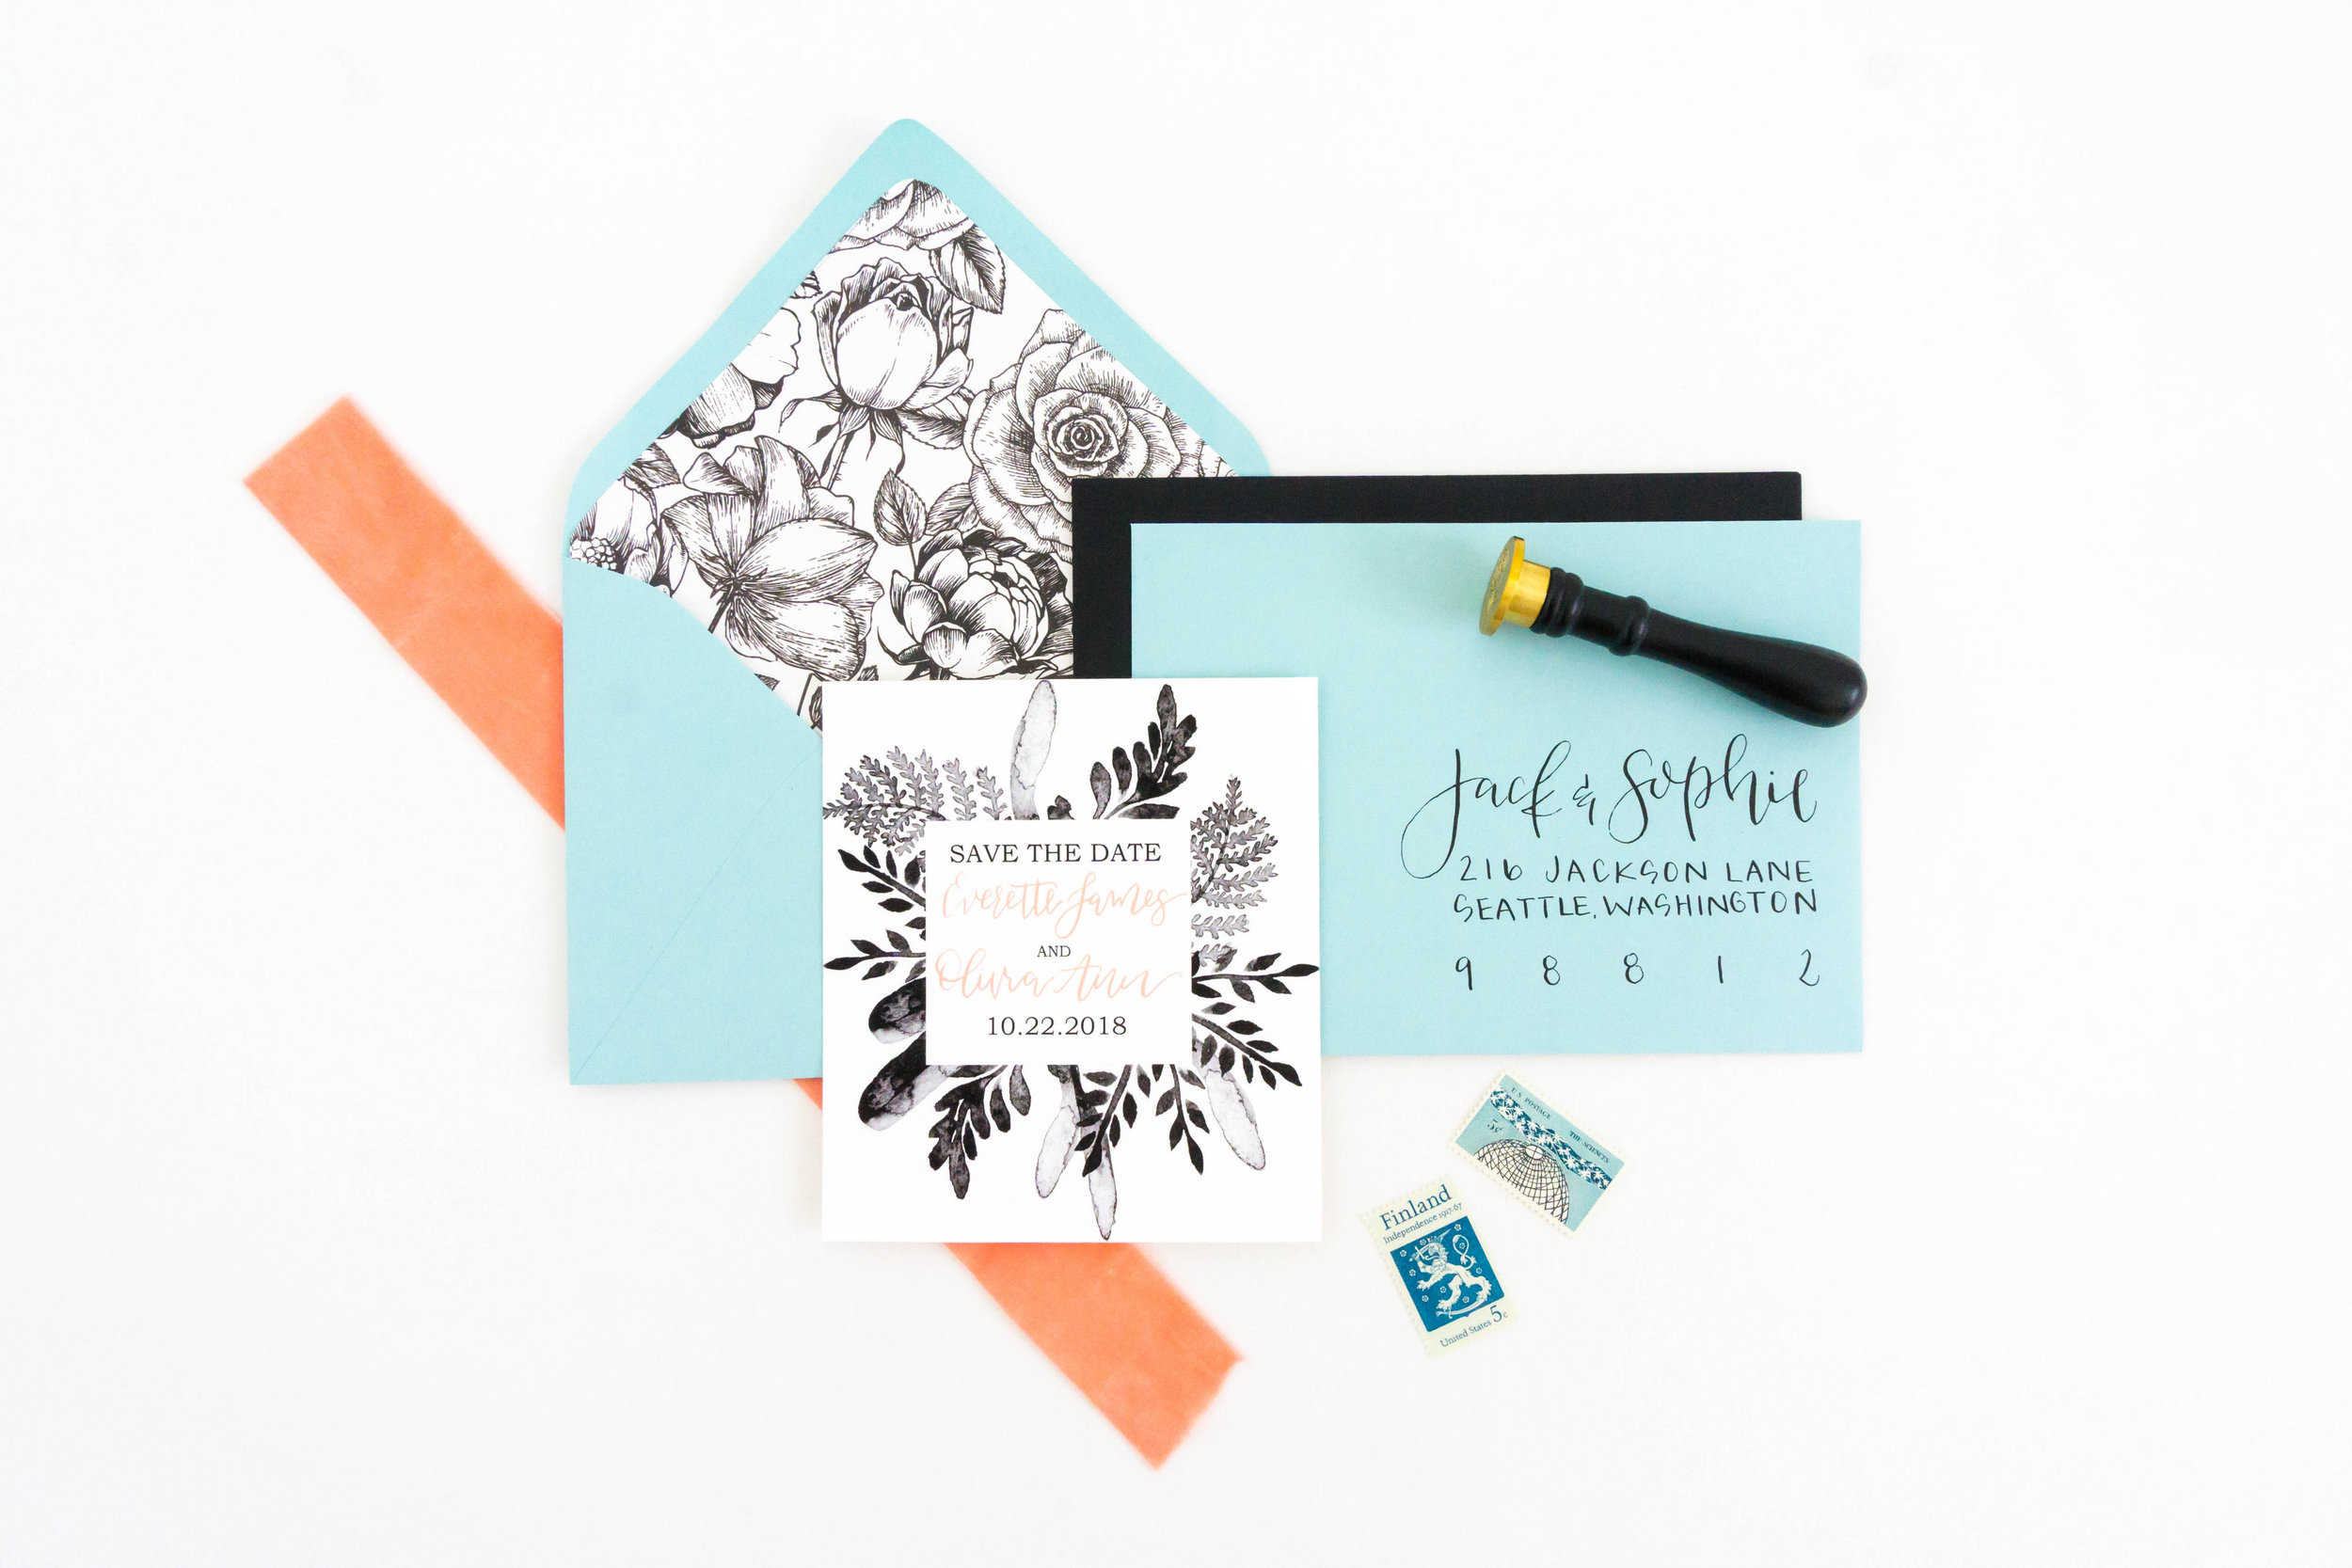 love-fern-design-studio-custom-wedding-invitations-for-the-modern-couple-modern-calligraphy-in-seattle-washington-custom-wedding-stationery-black-watercolor-save-the-date-teal-envelopes-floral-liner